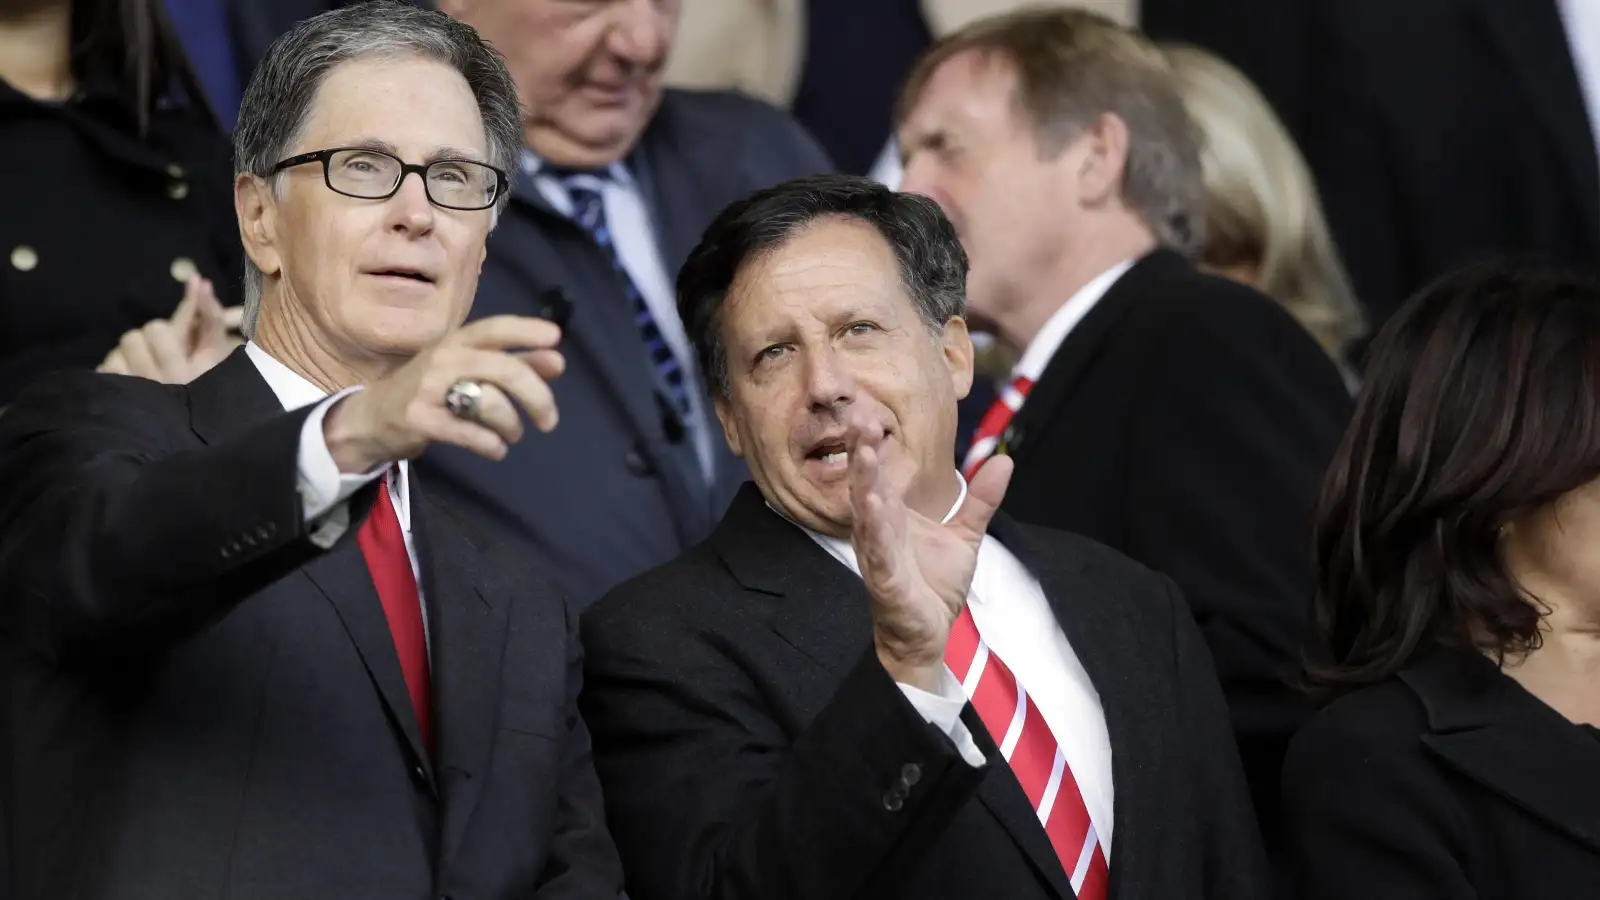 Liverpool chairman Tom Werner and John W. Henry during a match